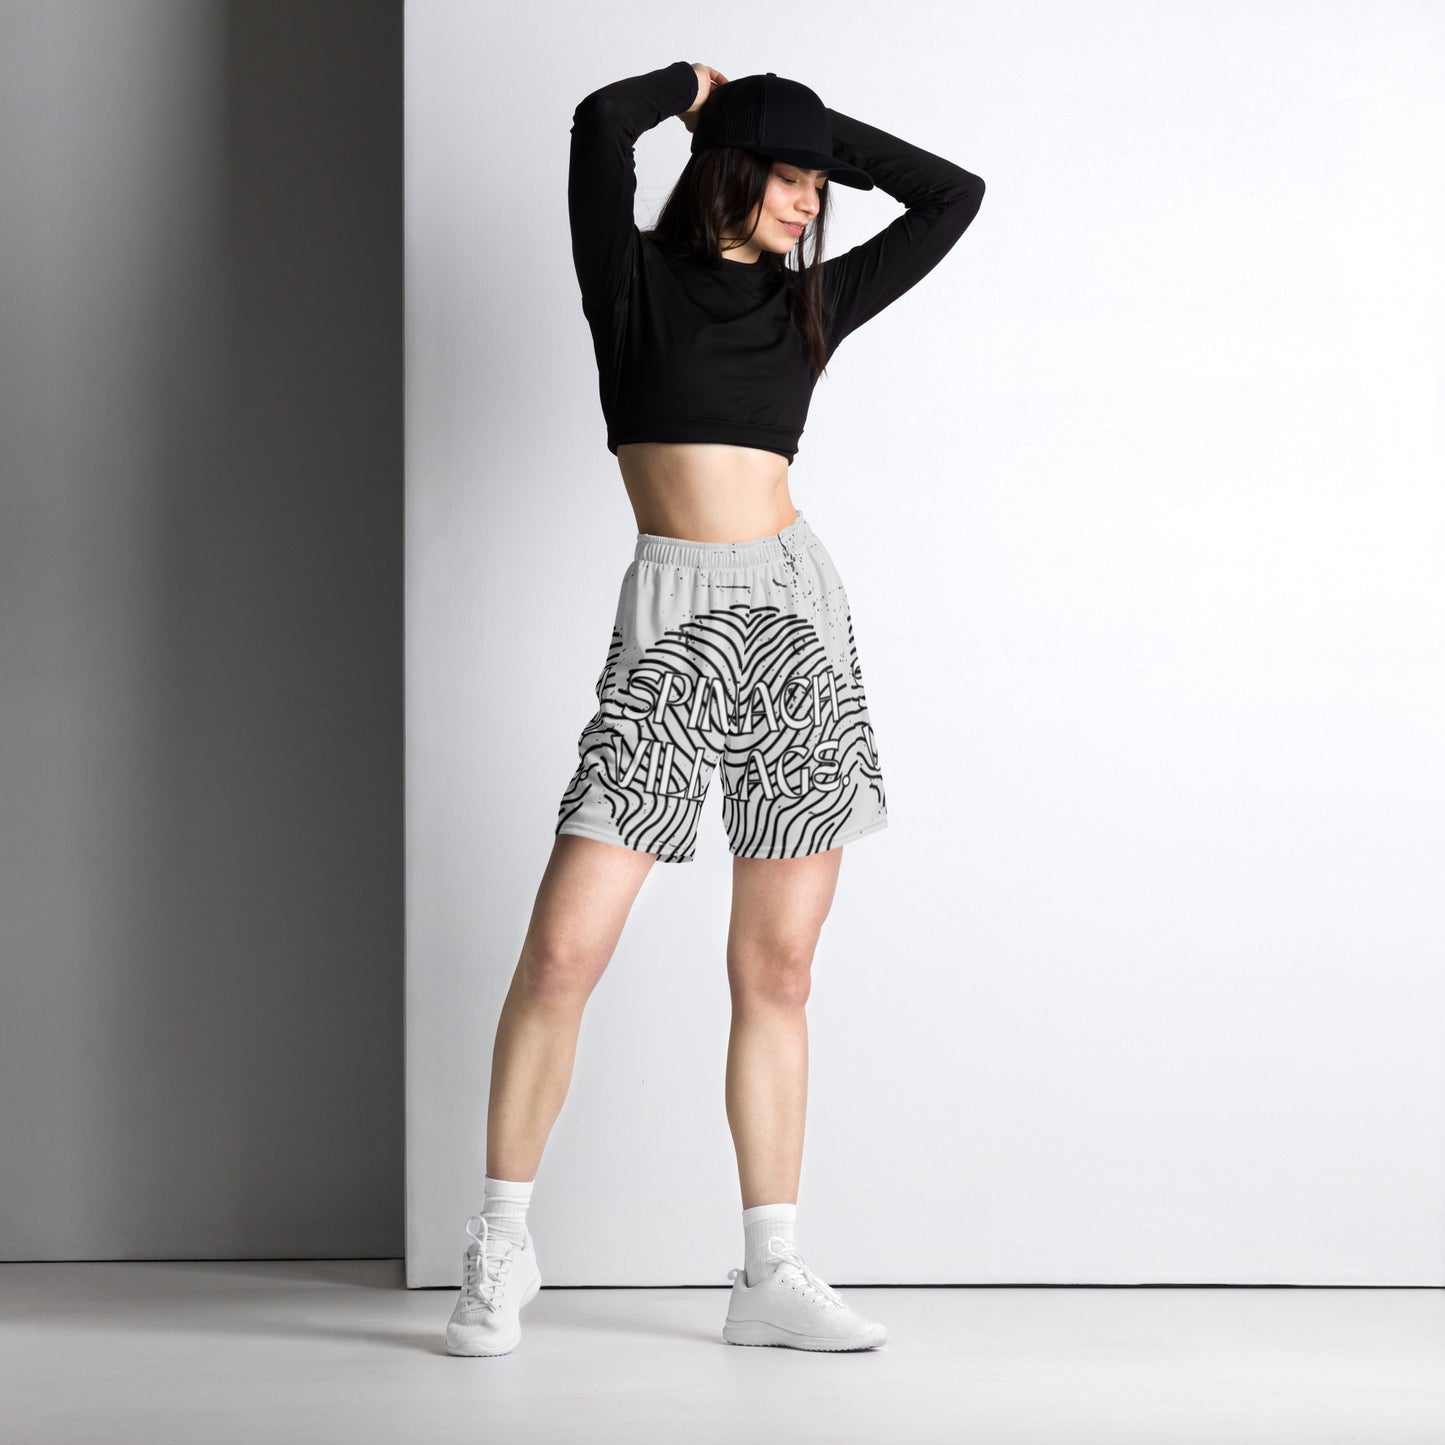 [Downtown] - Unisex (Recycled) Mesh Basketball Shorts (Light)